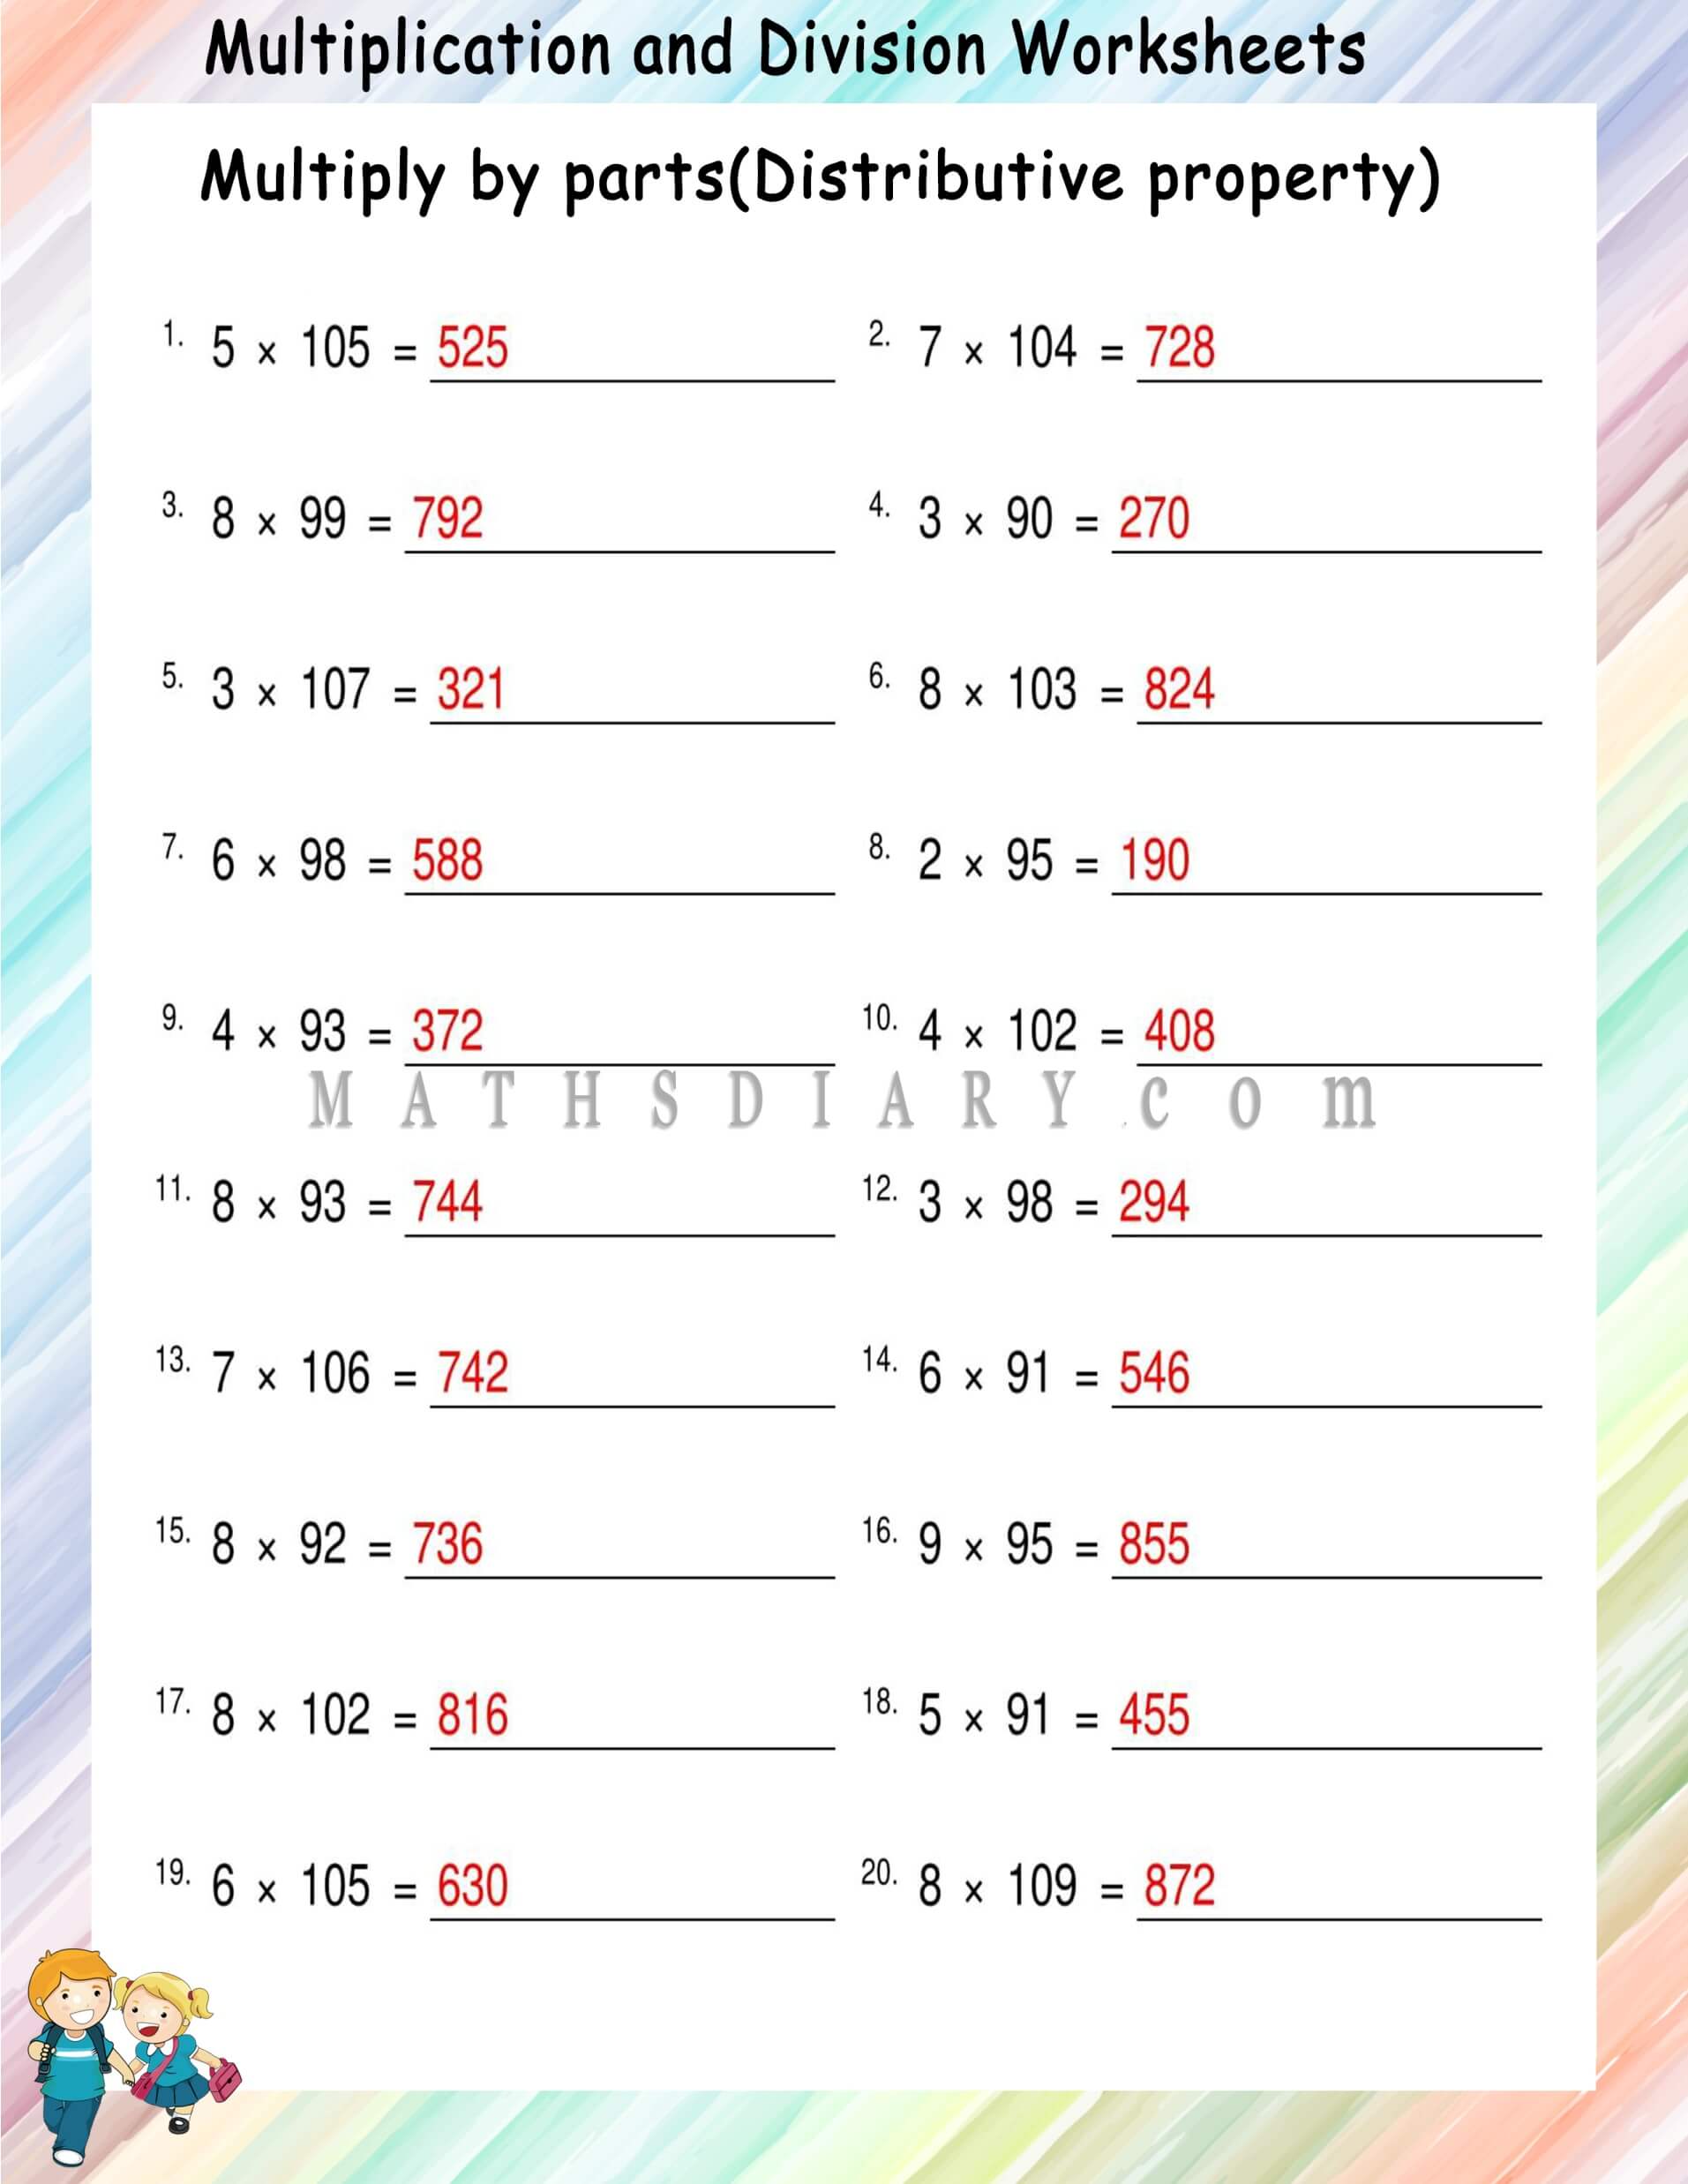 Multiplying By Parts(Distributive Property) worksheets - Math Regarding Distributive Property Worksheet Answers